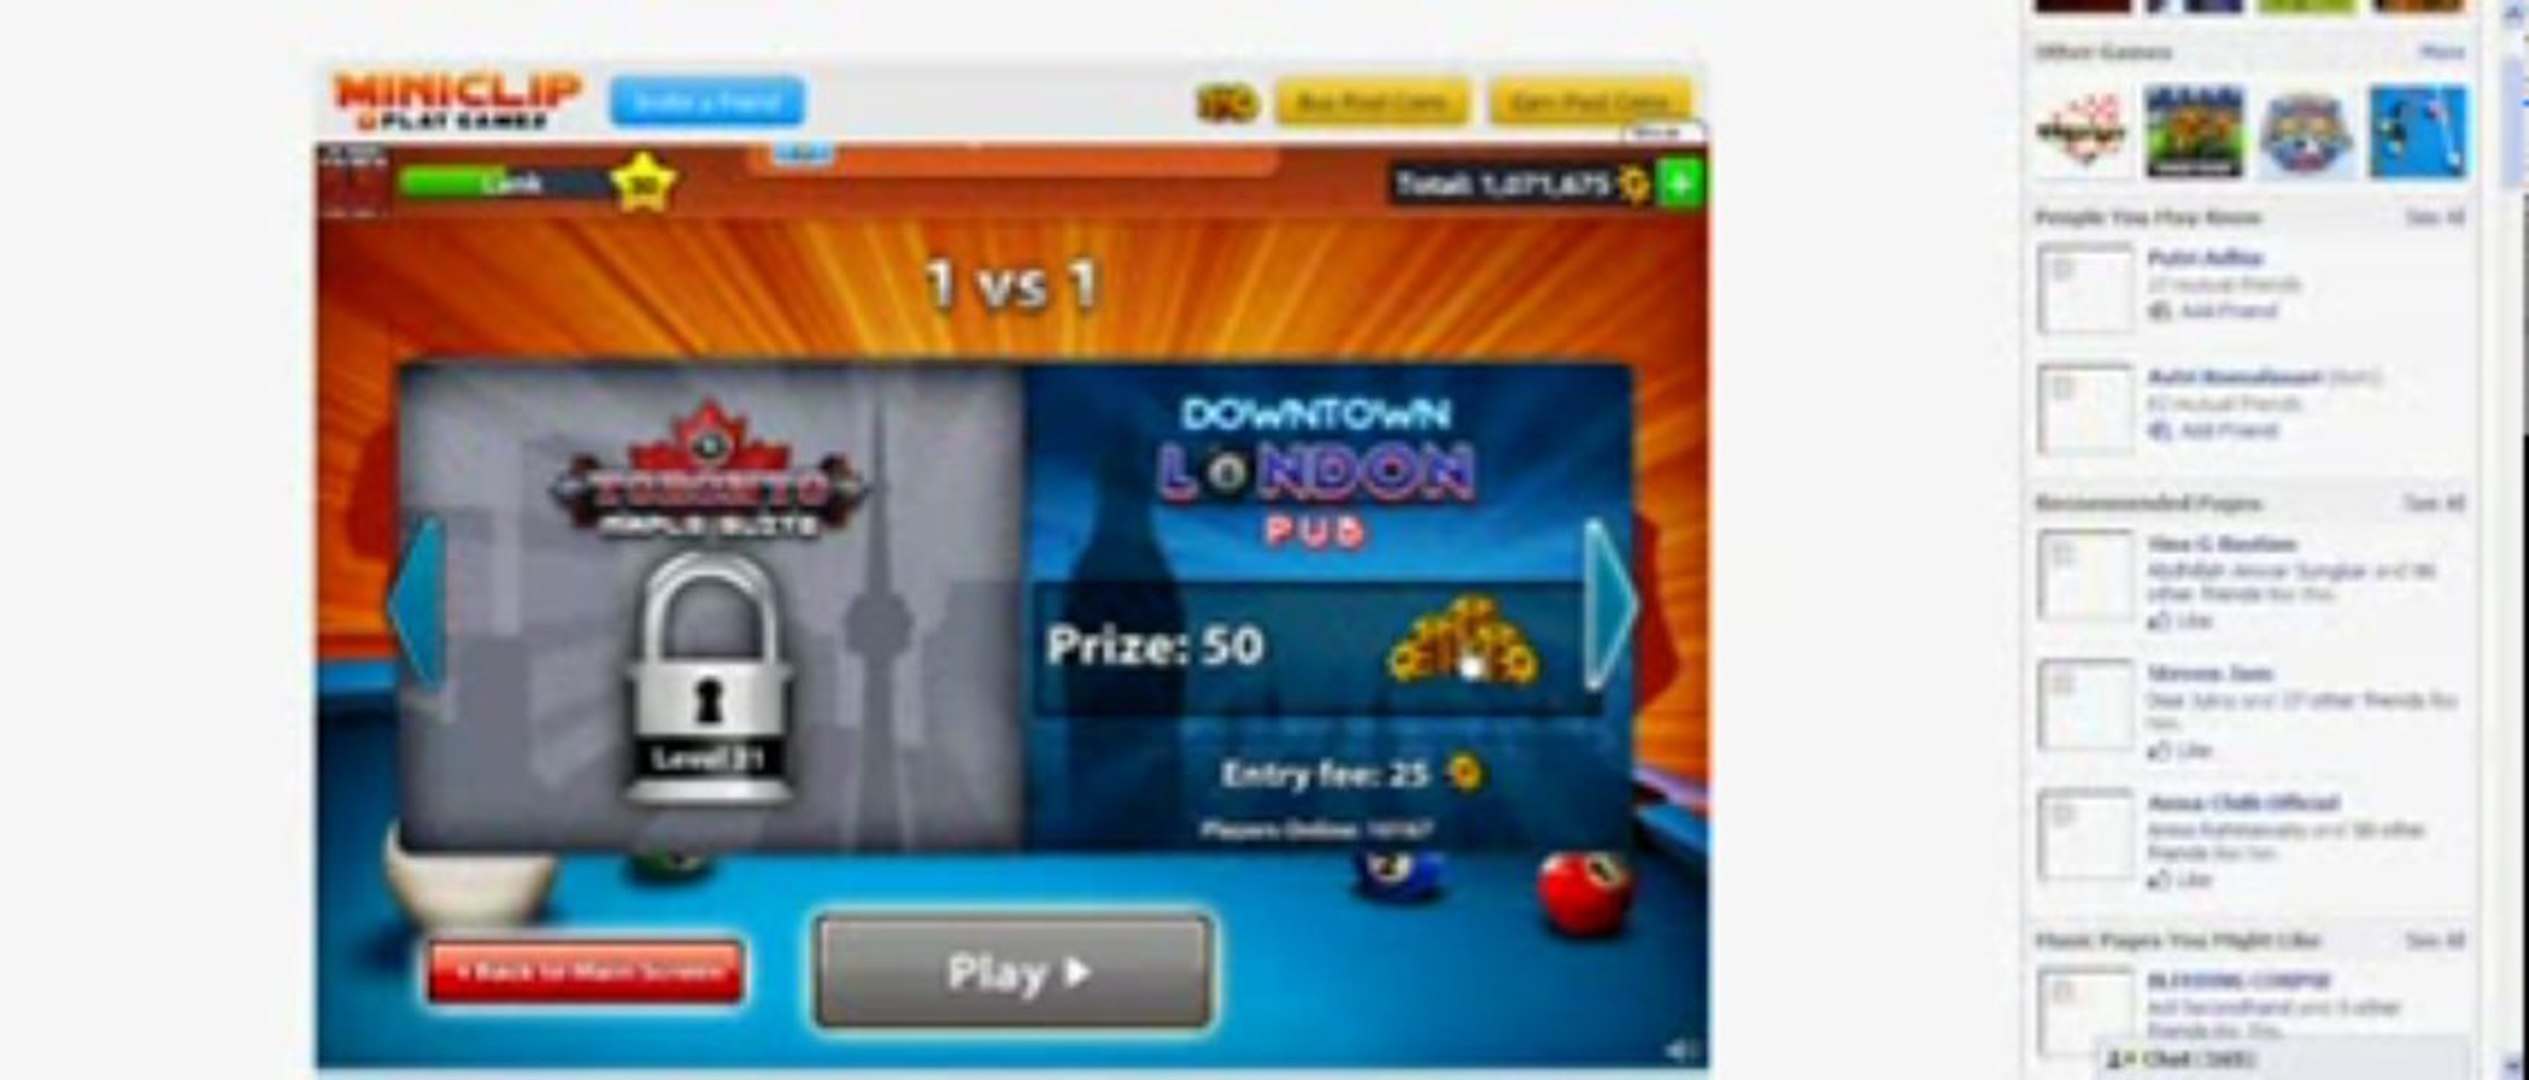 Tutorial Cheat Trick Coins 8Ball Pool With CheatEngine - 